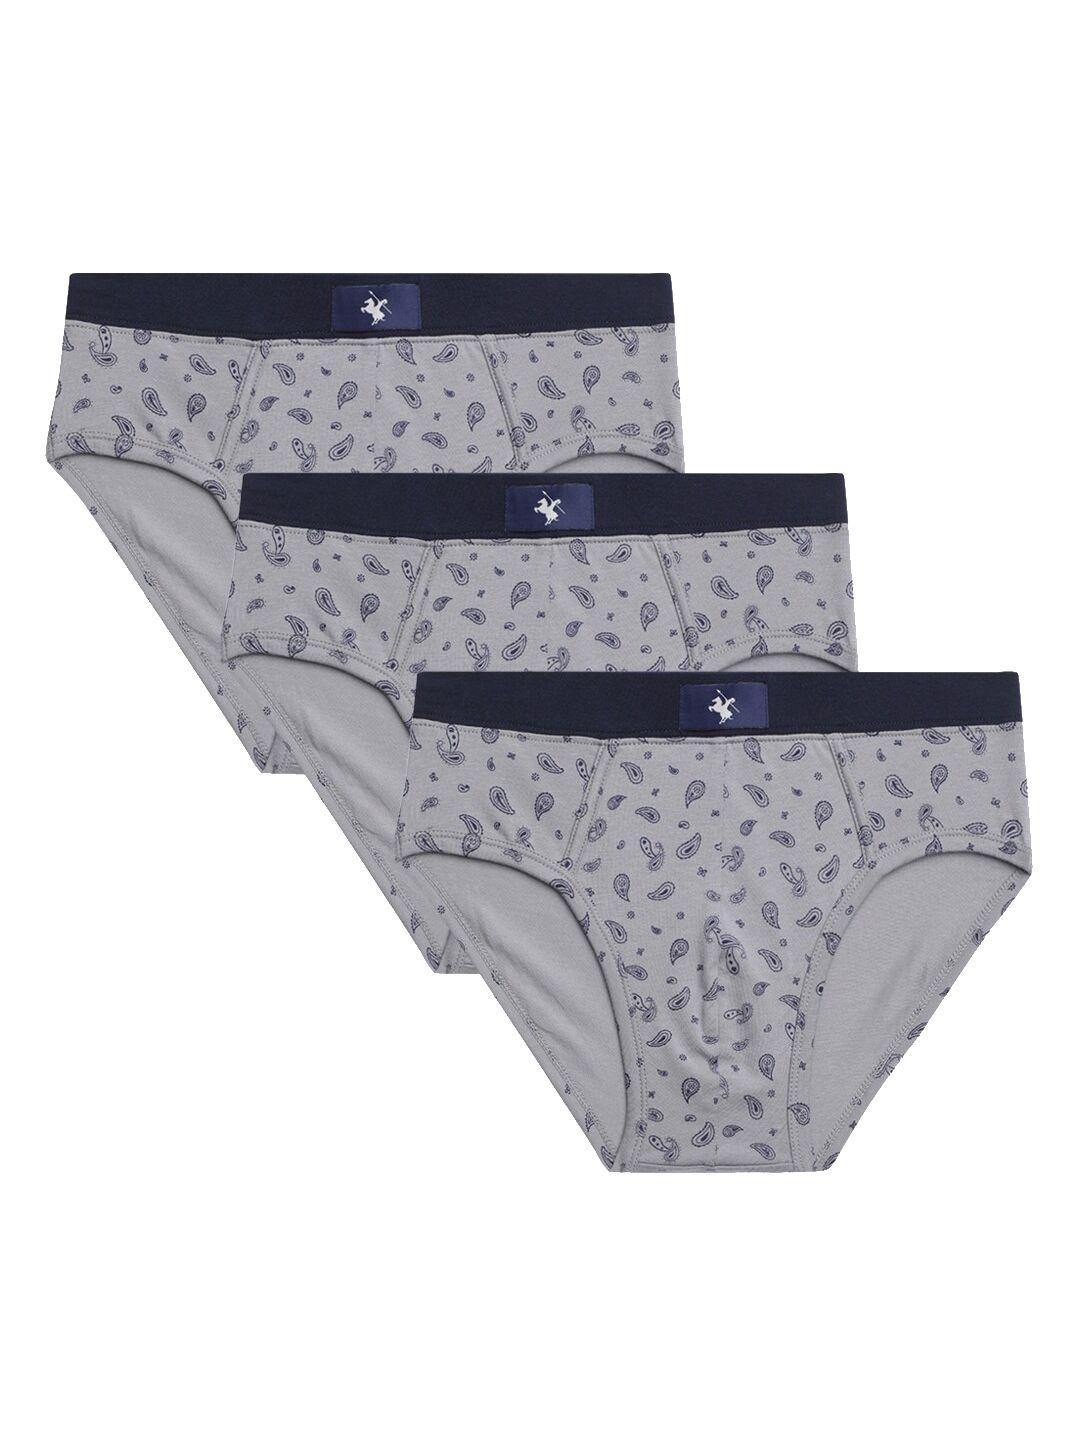 Cantabil Men Pack Of 3 Grey & Black Printed Pure Cotton Briefs